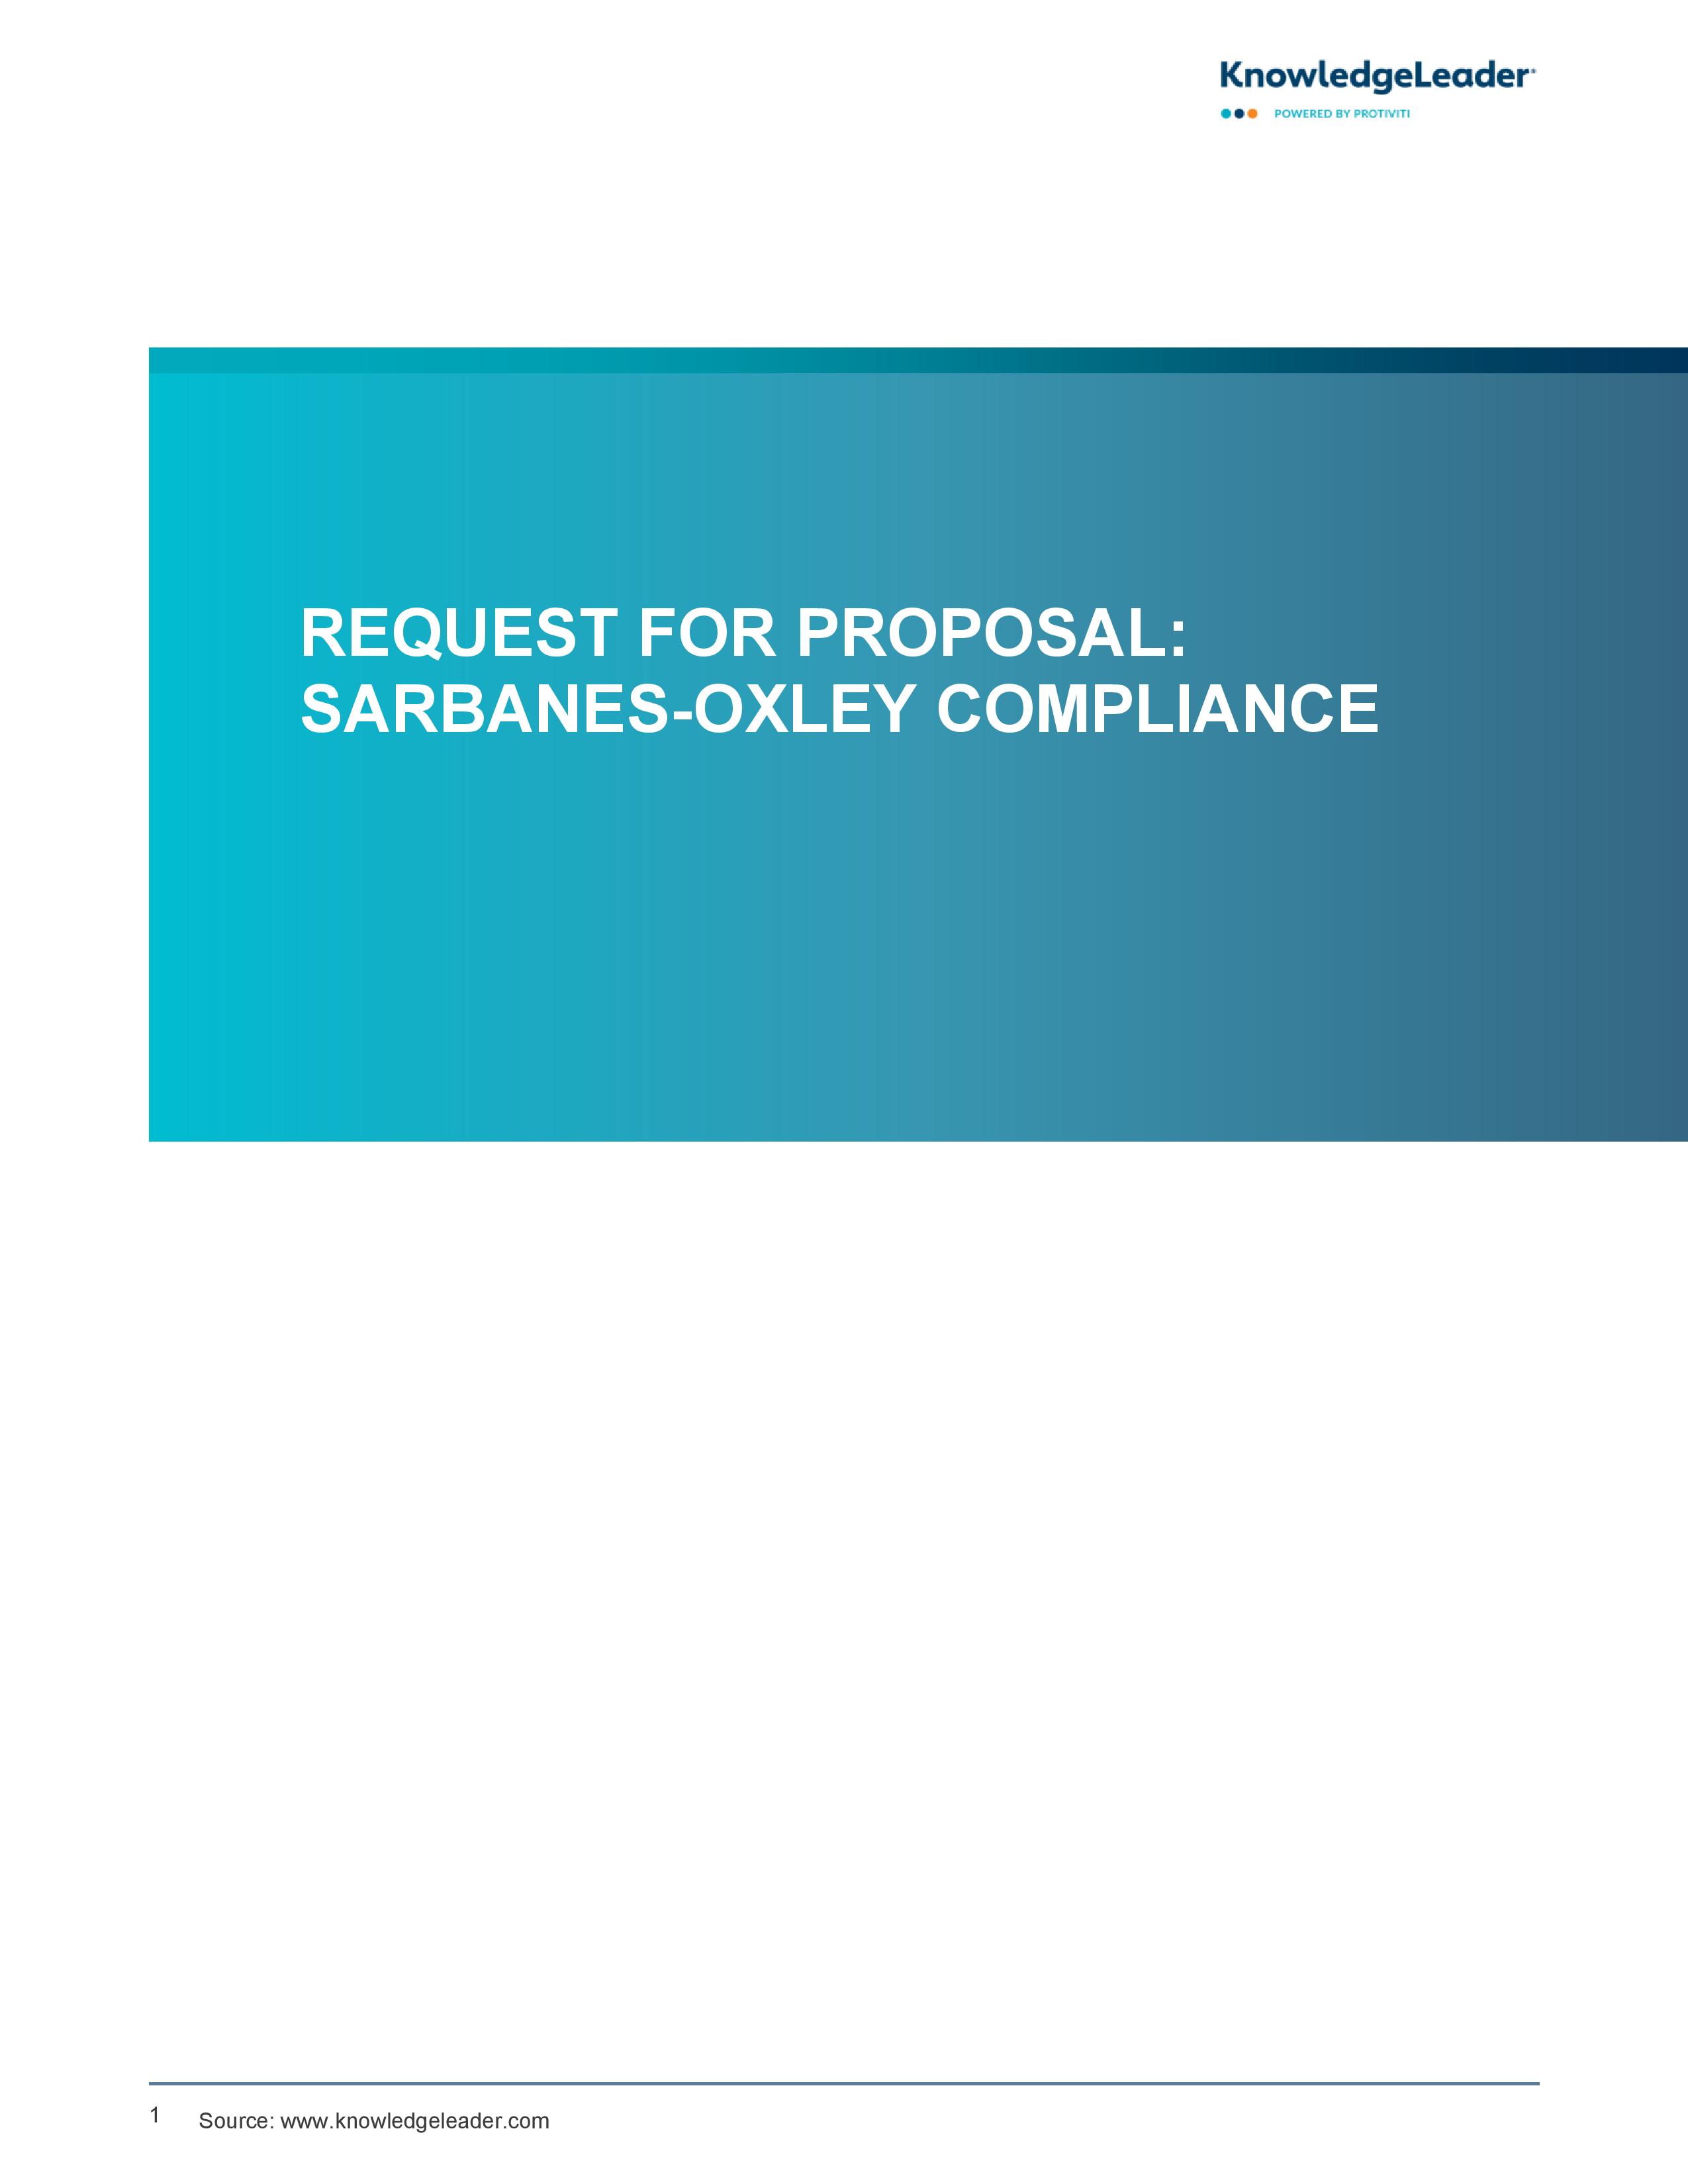 Screenshot of the first page of Request for Proposal - Sarbanes-Oxley Compliance